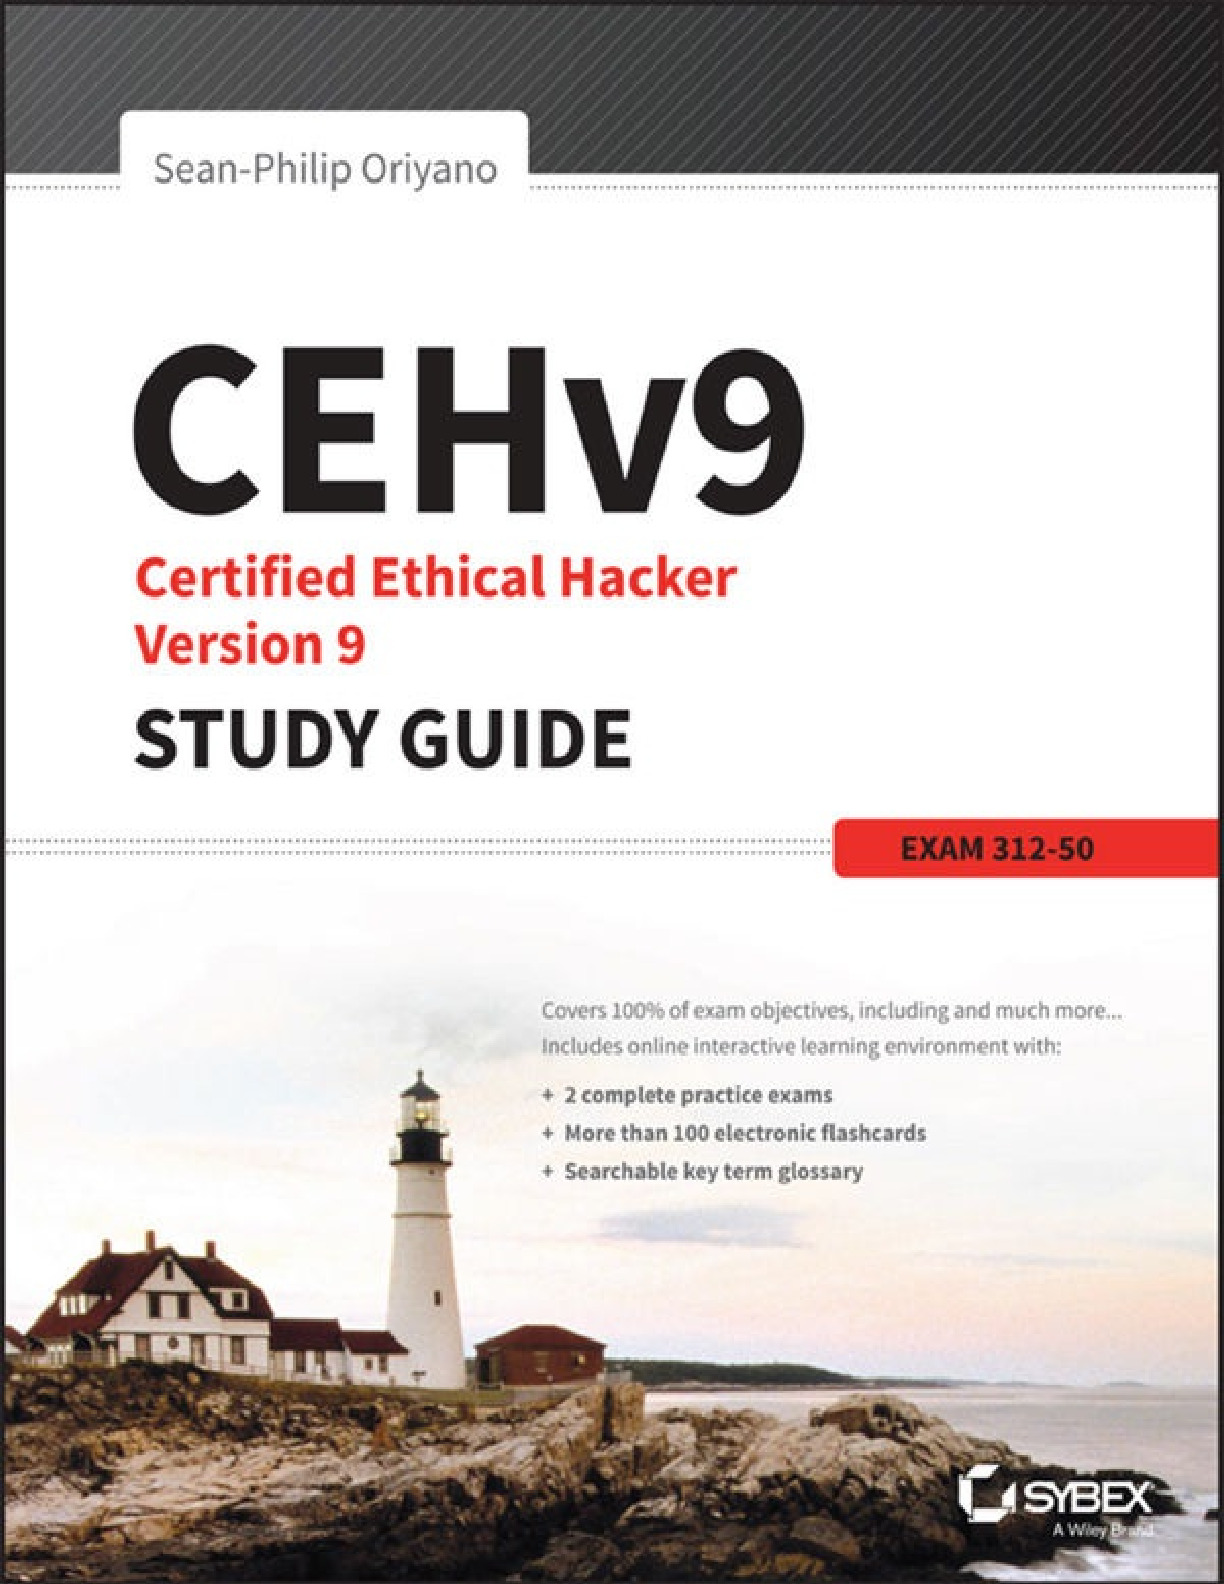 2. CEH v9 Certified Ethical Hacker Version 9